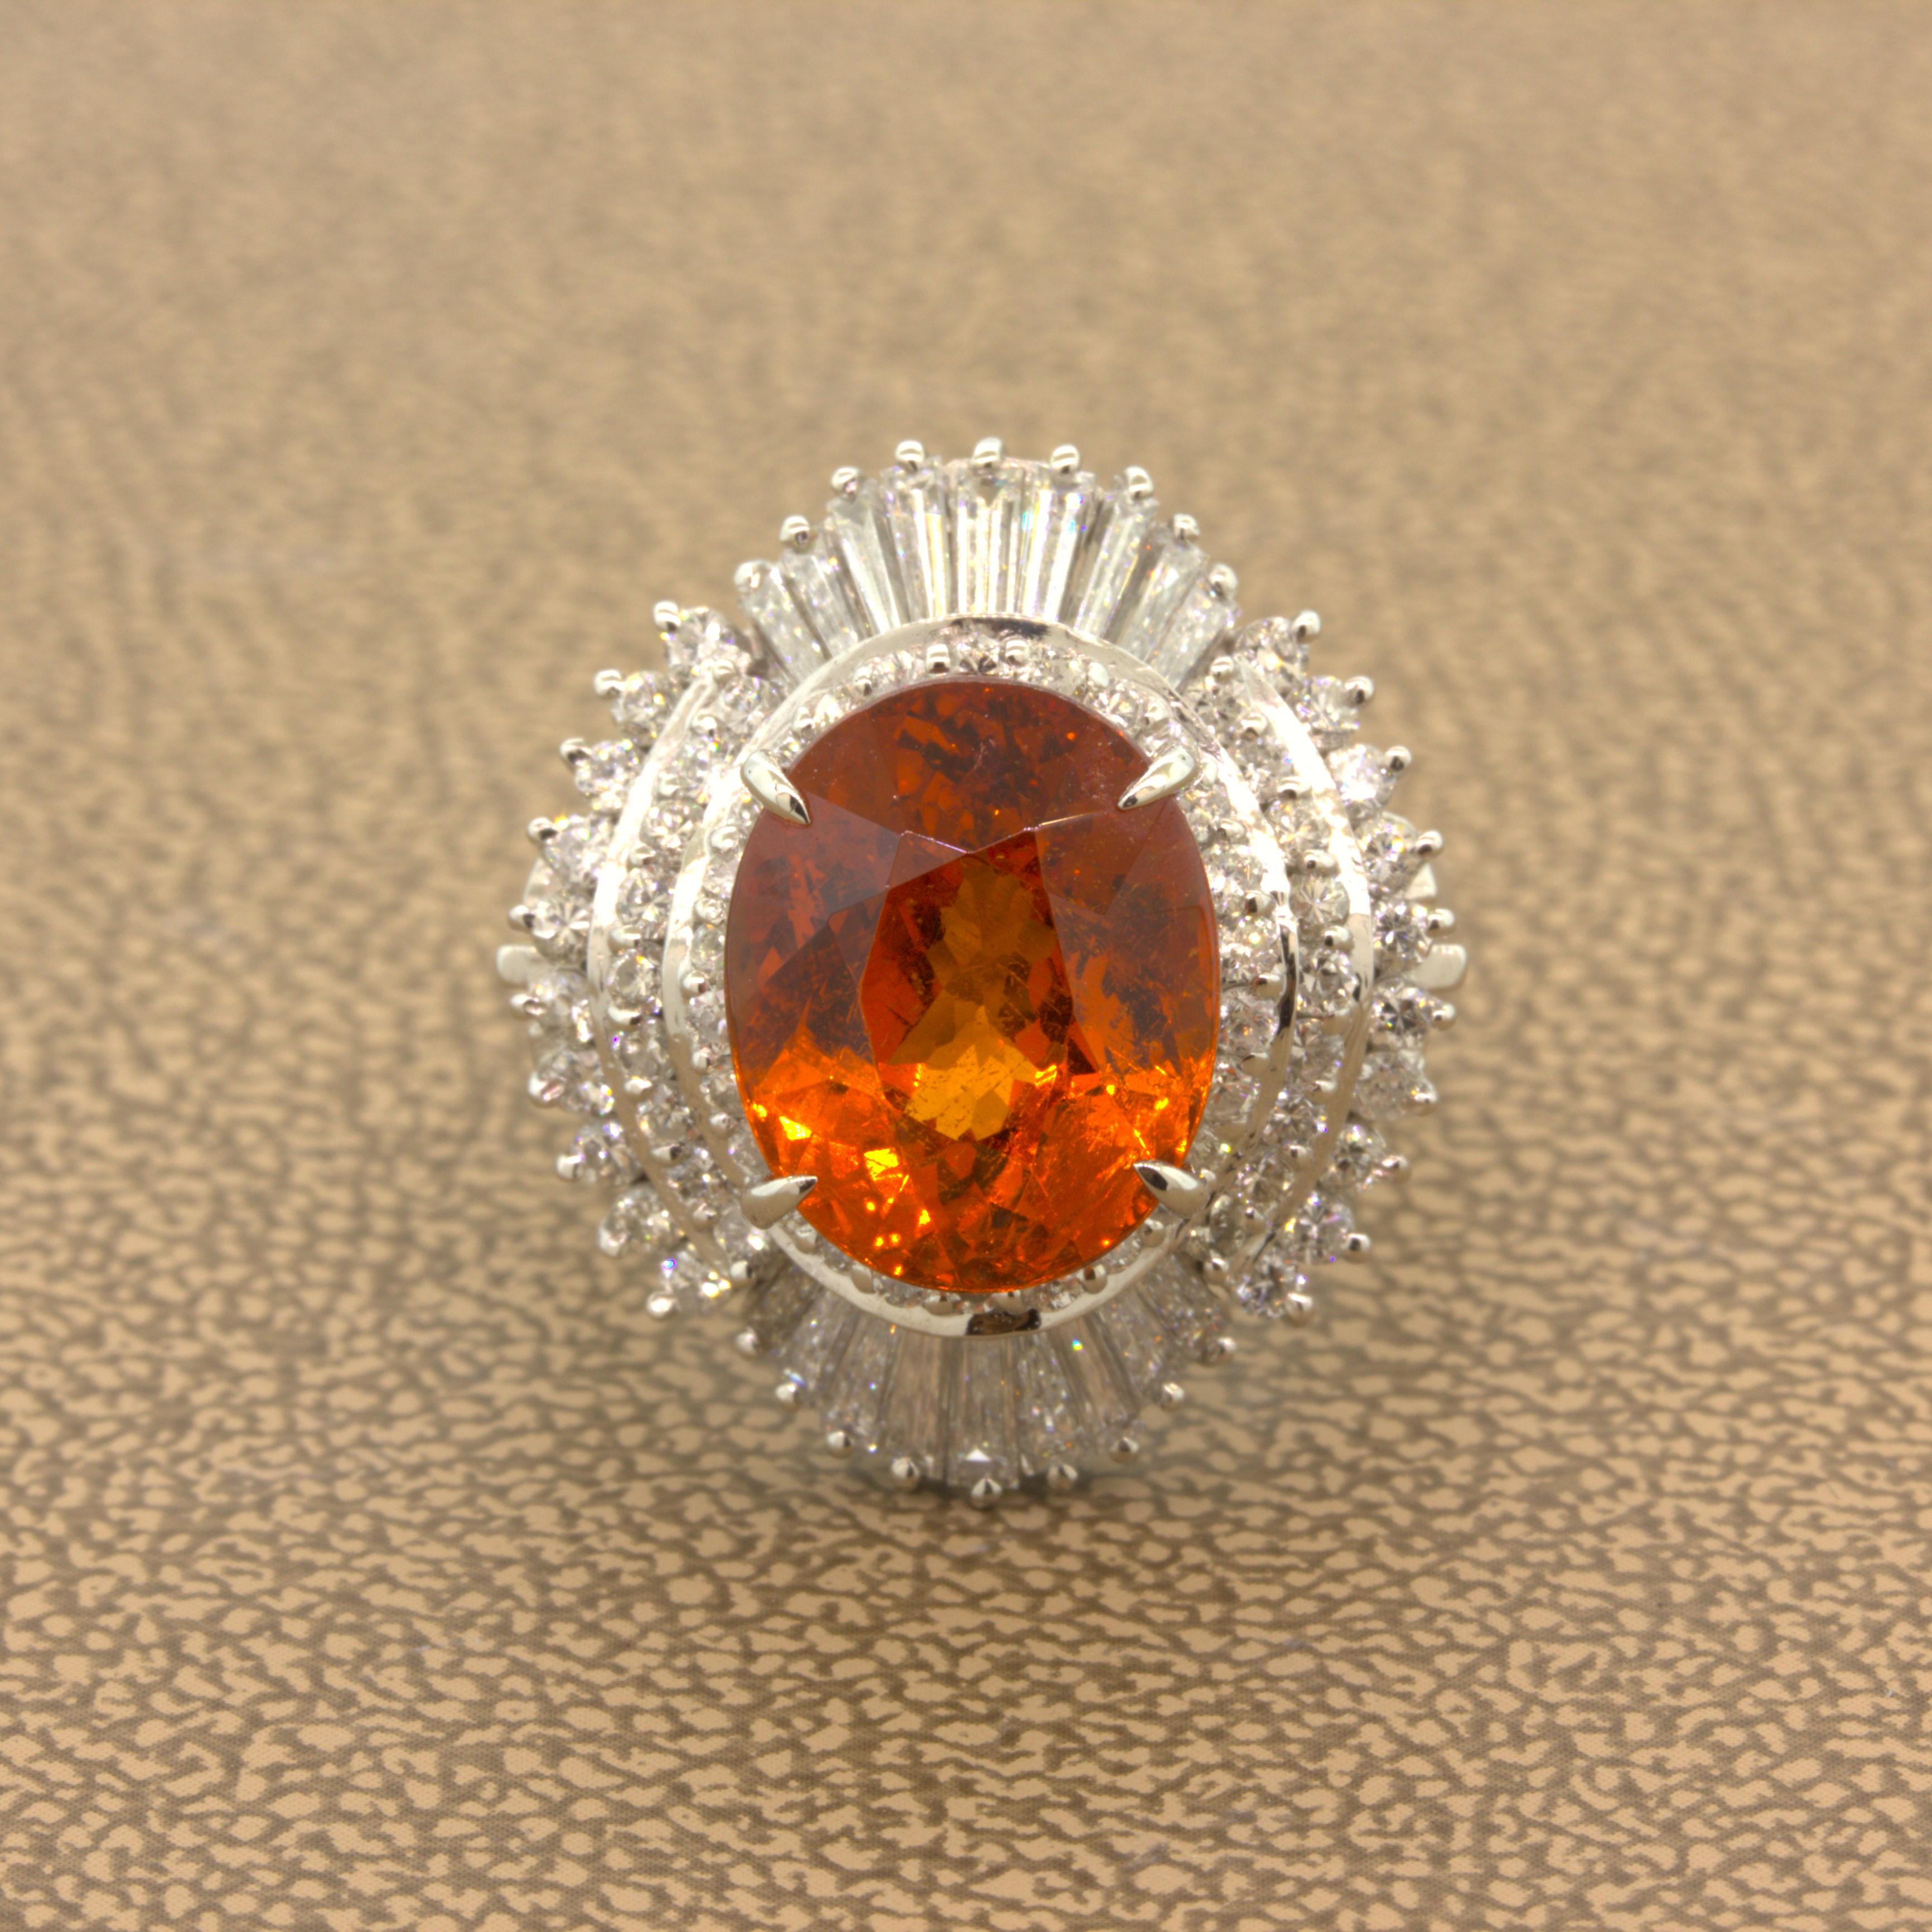 A richly colored juicy mandarin garnet takes center stage. It weighs 7.01 carats and has a super-rich and bright vivid orange color that simply pops! No other gemstone comes close to the intense pure orange color of mandarin garnets. There are 1.55